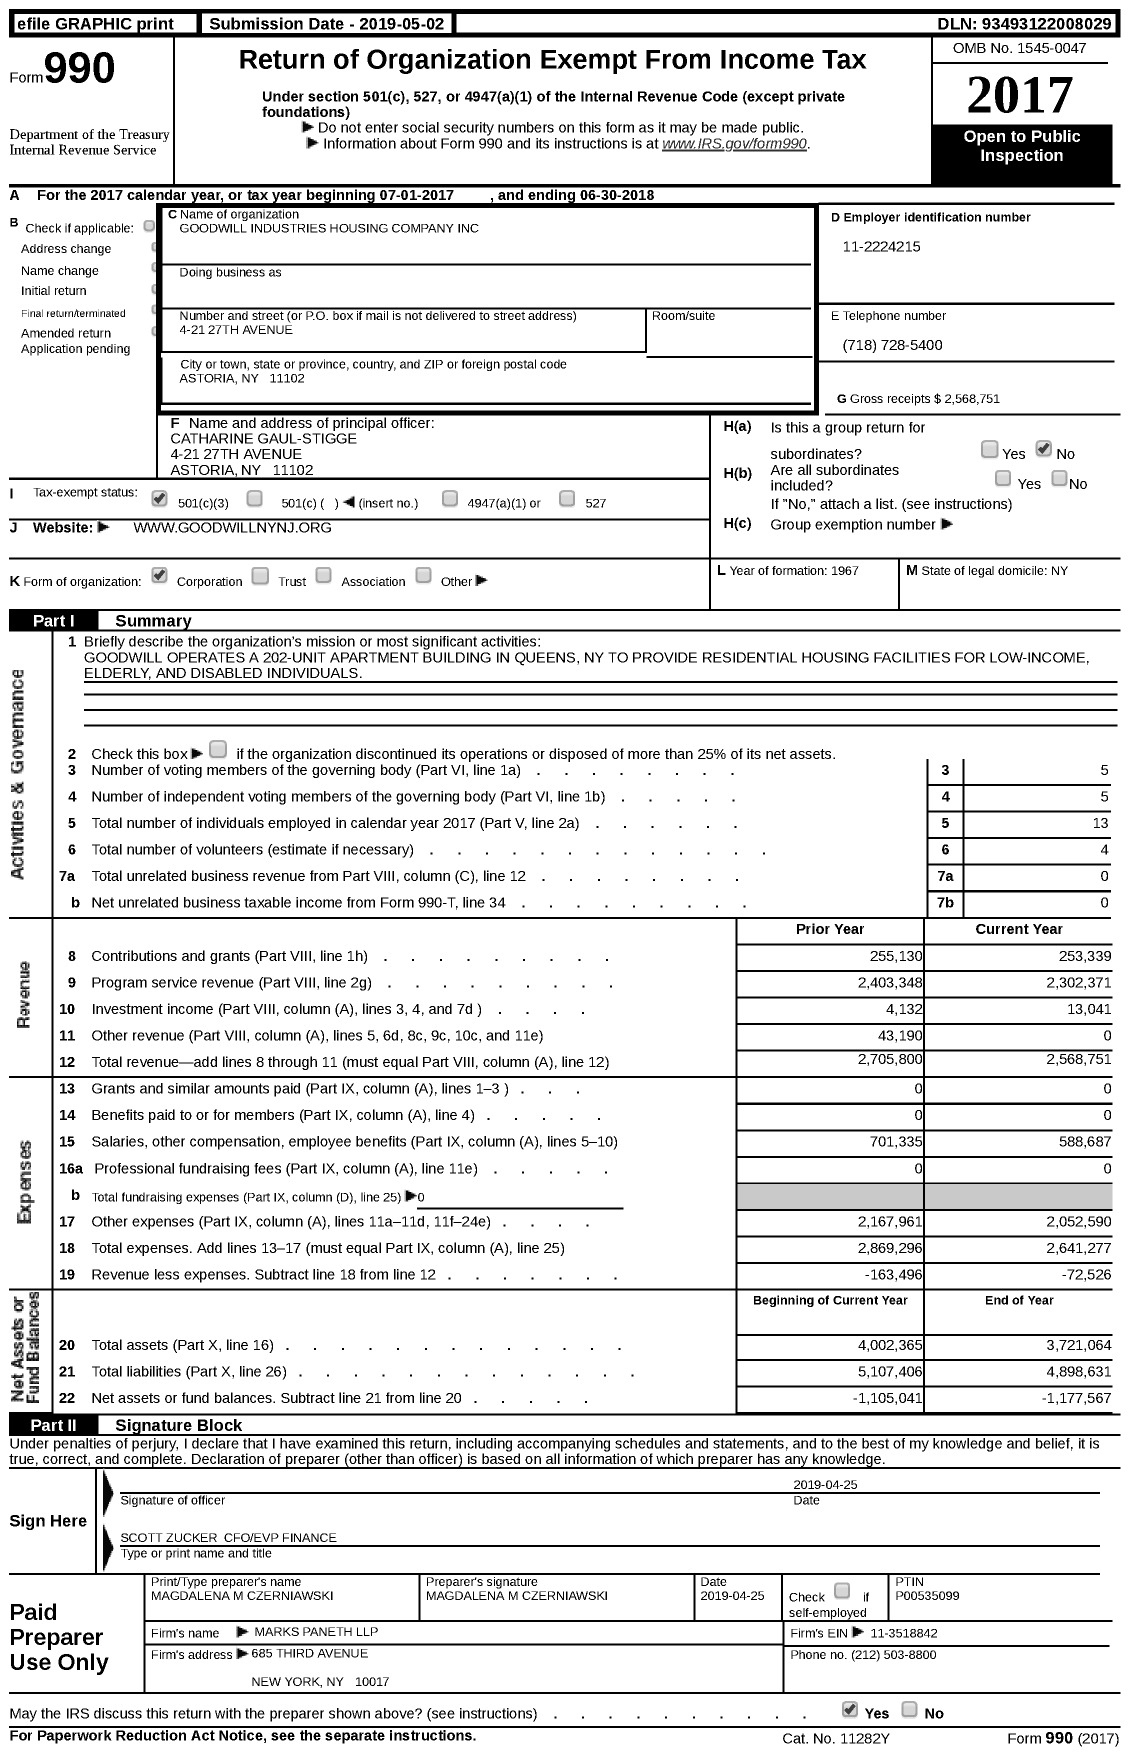 Image of first page of 2017 Form 990 for Goodwill Industries Housing Company